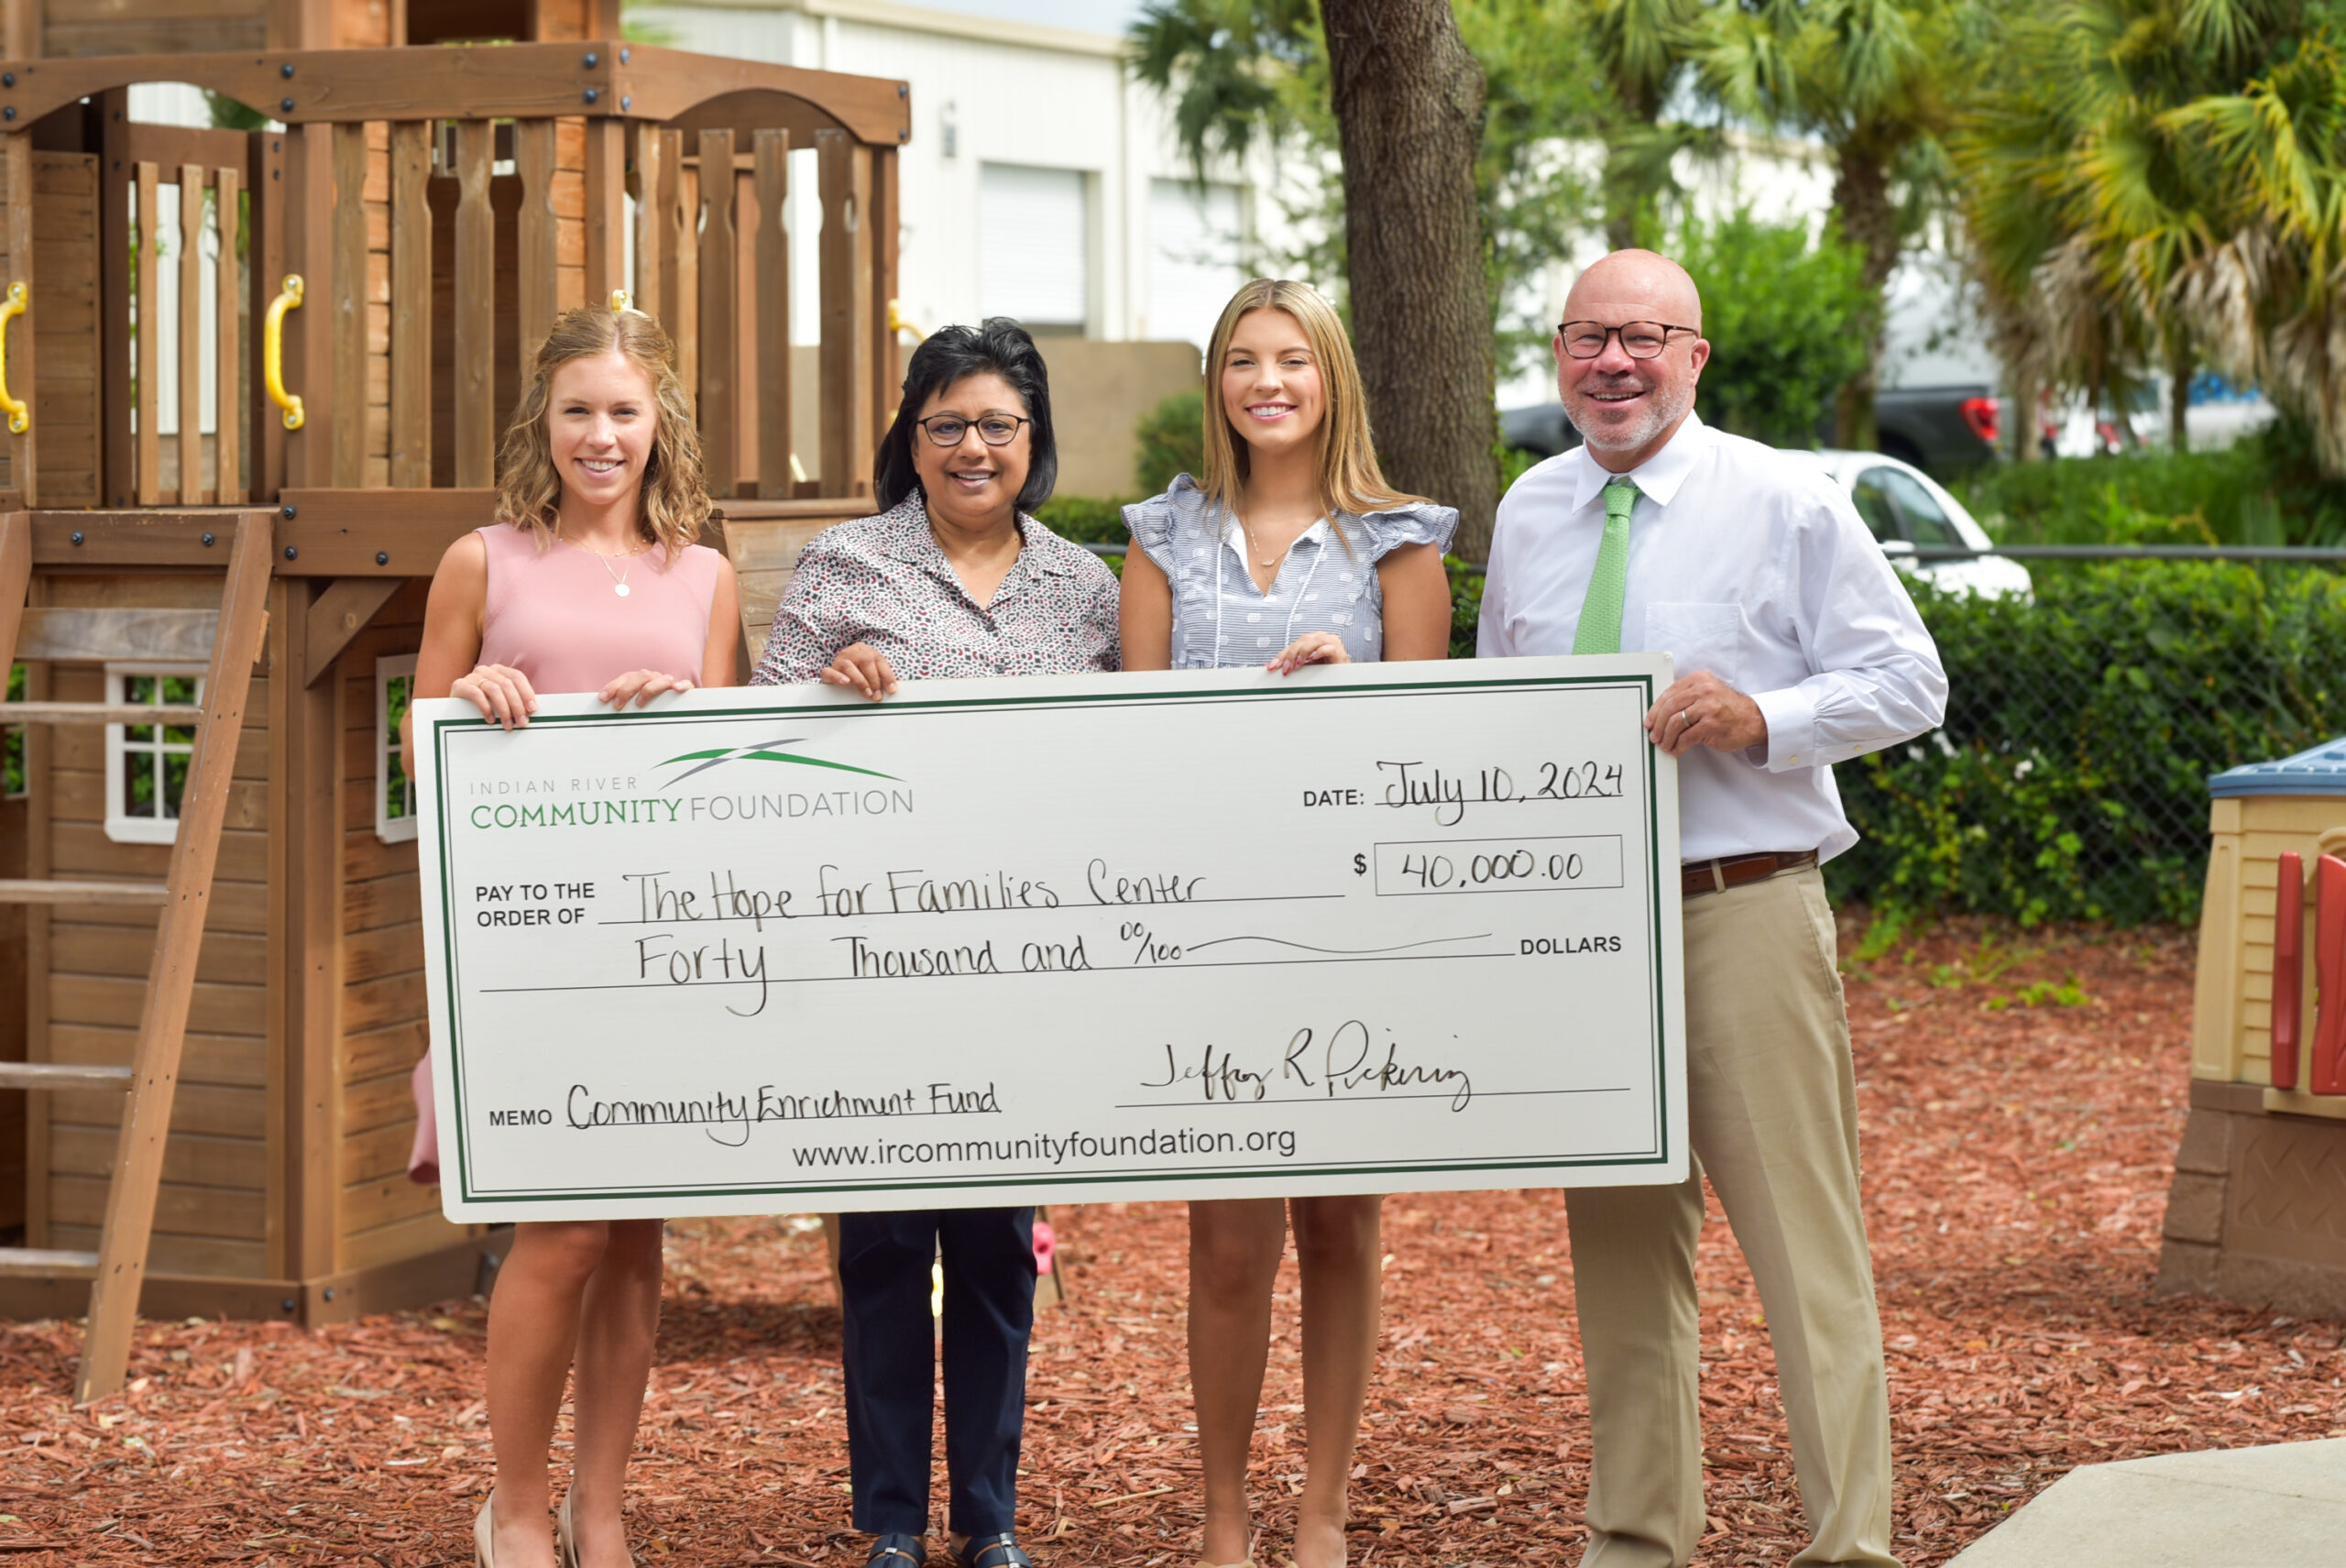 IRCF Awards The Hope for Families Center $40,000